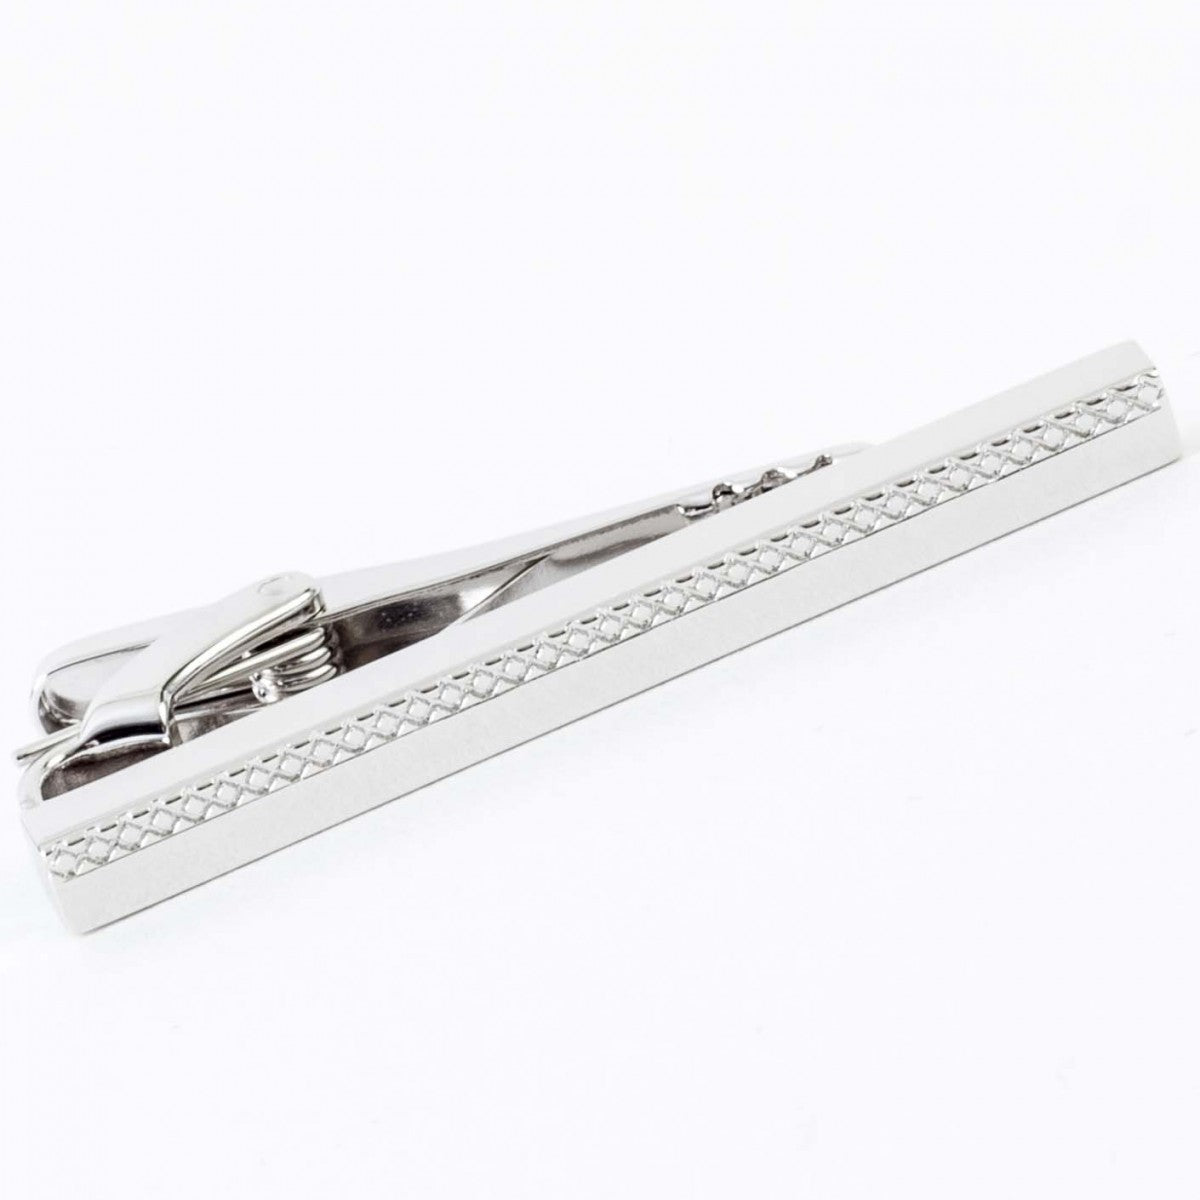 Tateossian Men's Silver Tie Bar Engraved with Subtle Design